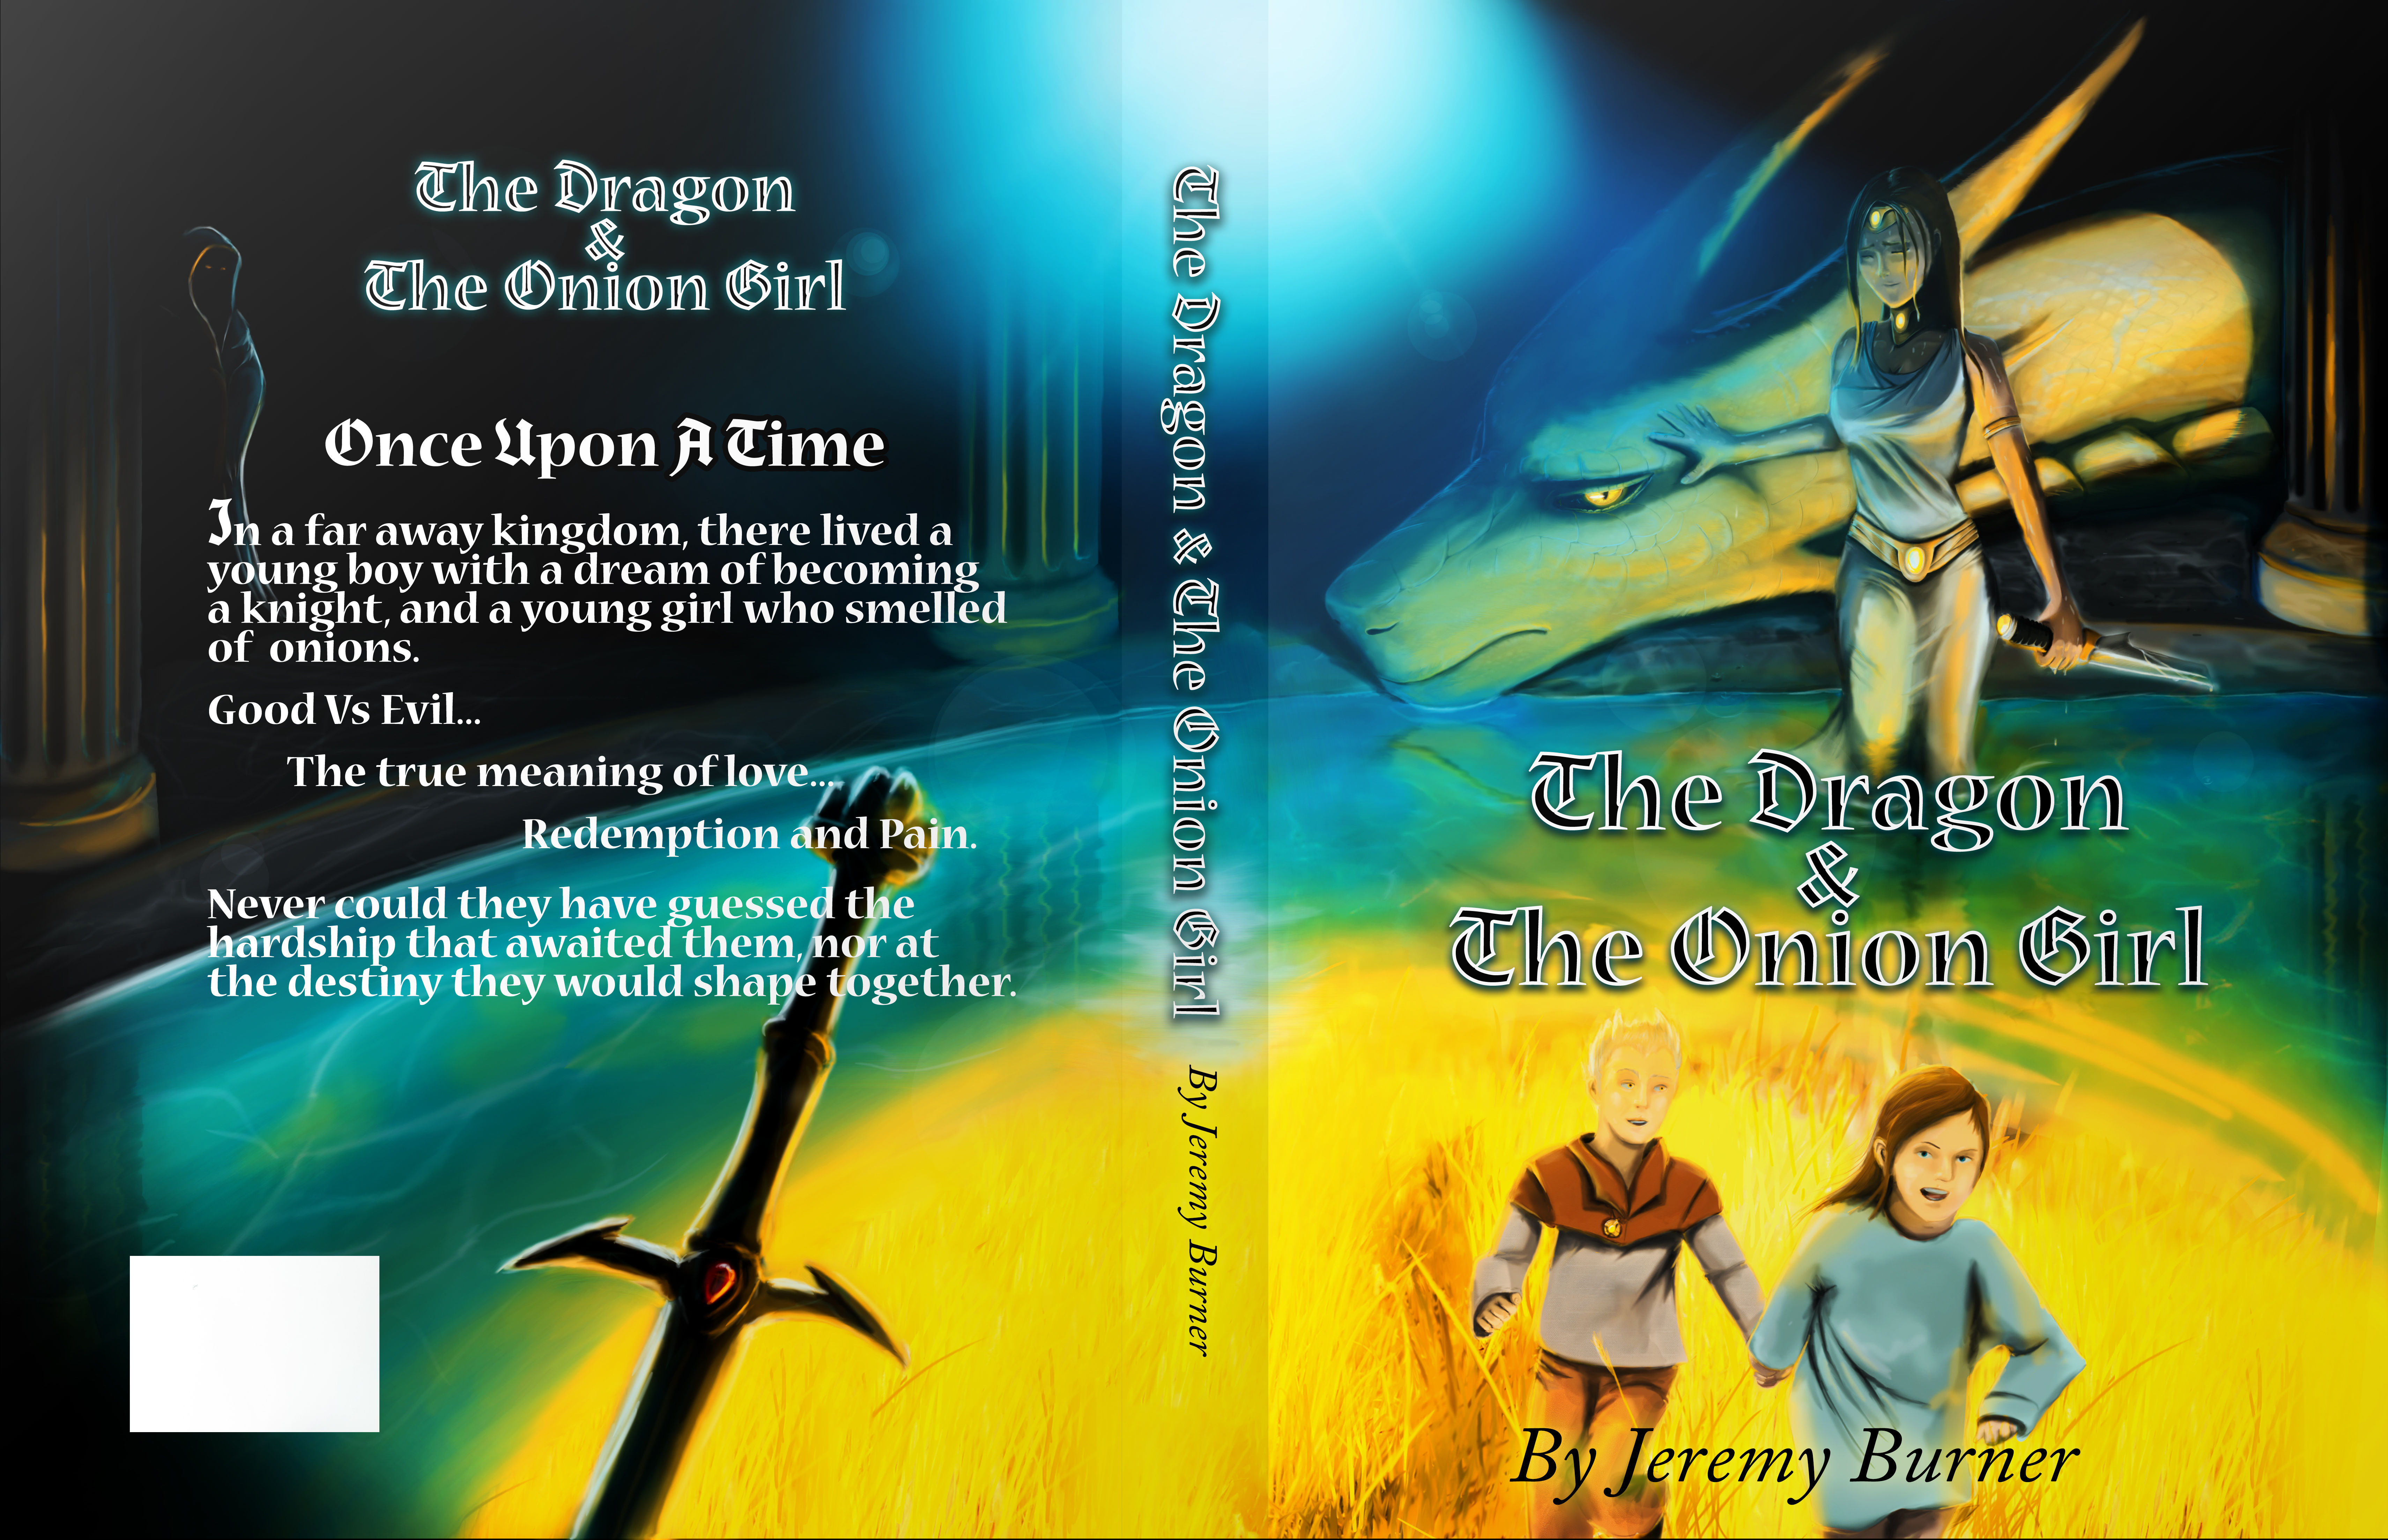 The Dragon and the Onion Girl full cover with text.